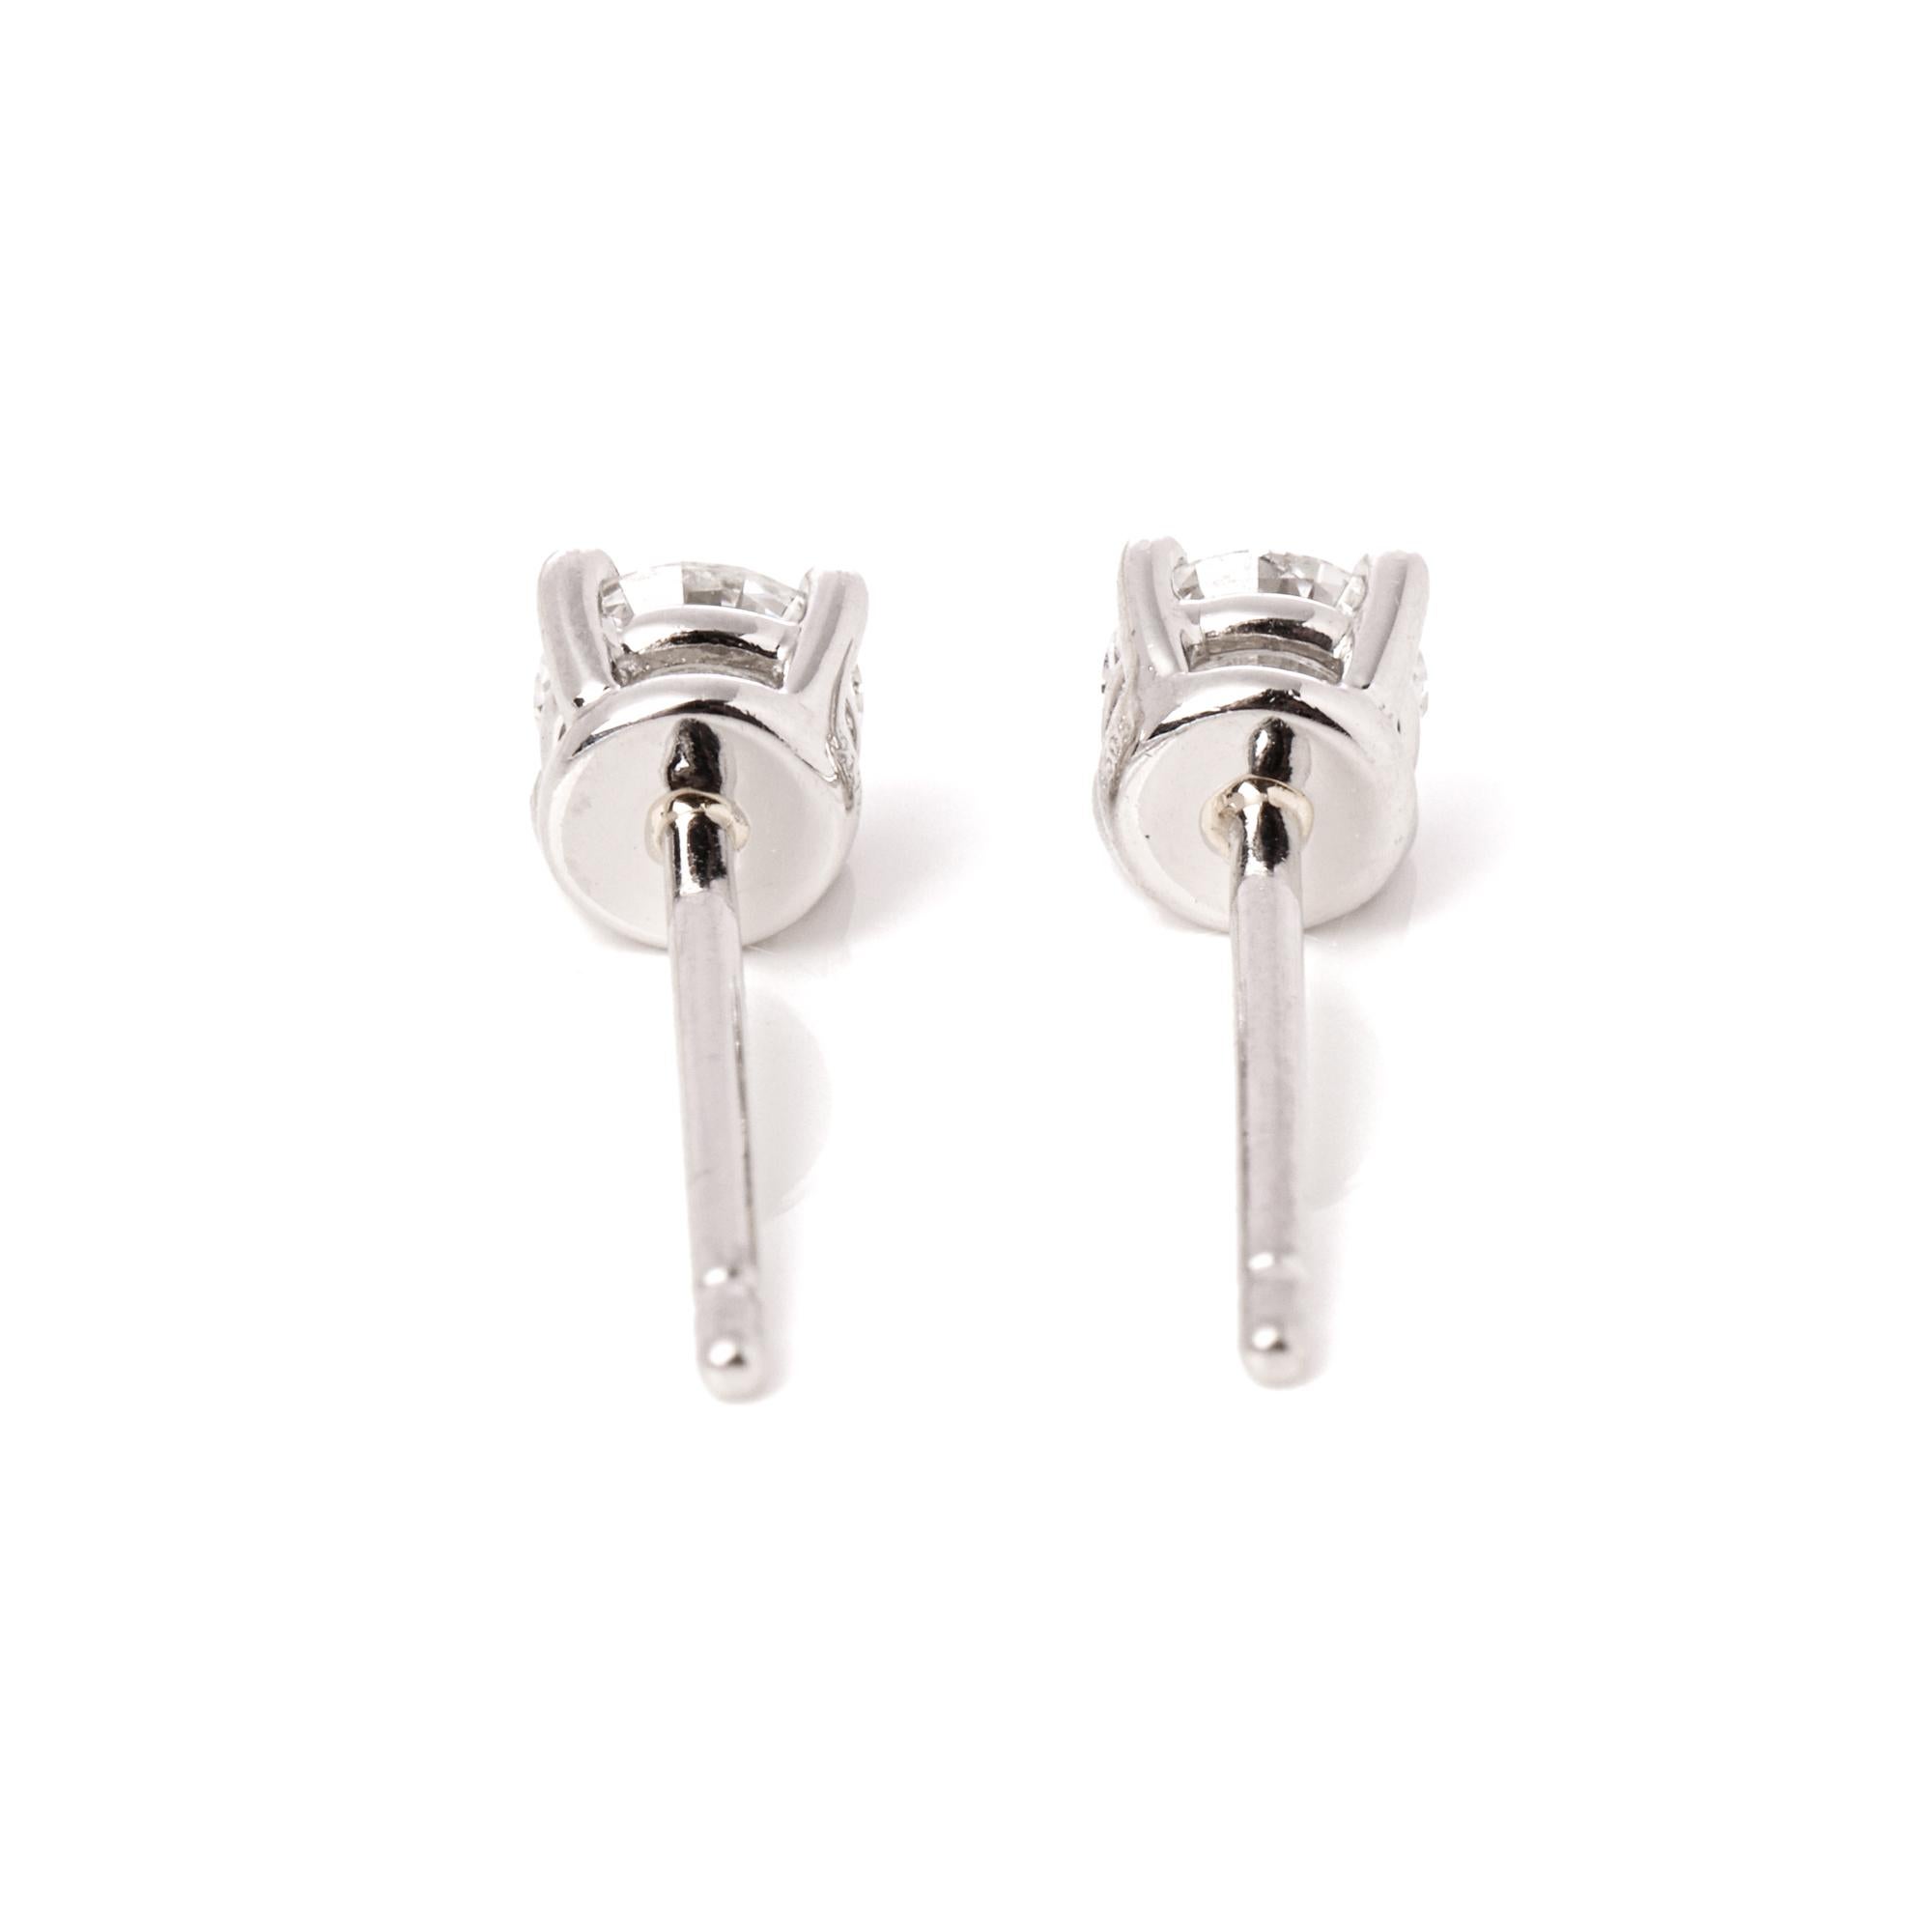 Contemporary Tiffany & Co. 0.48ct Solitaire Diamond Stud Earrings